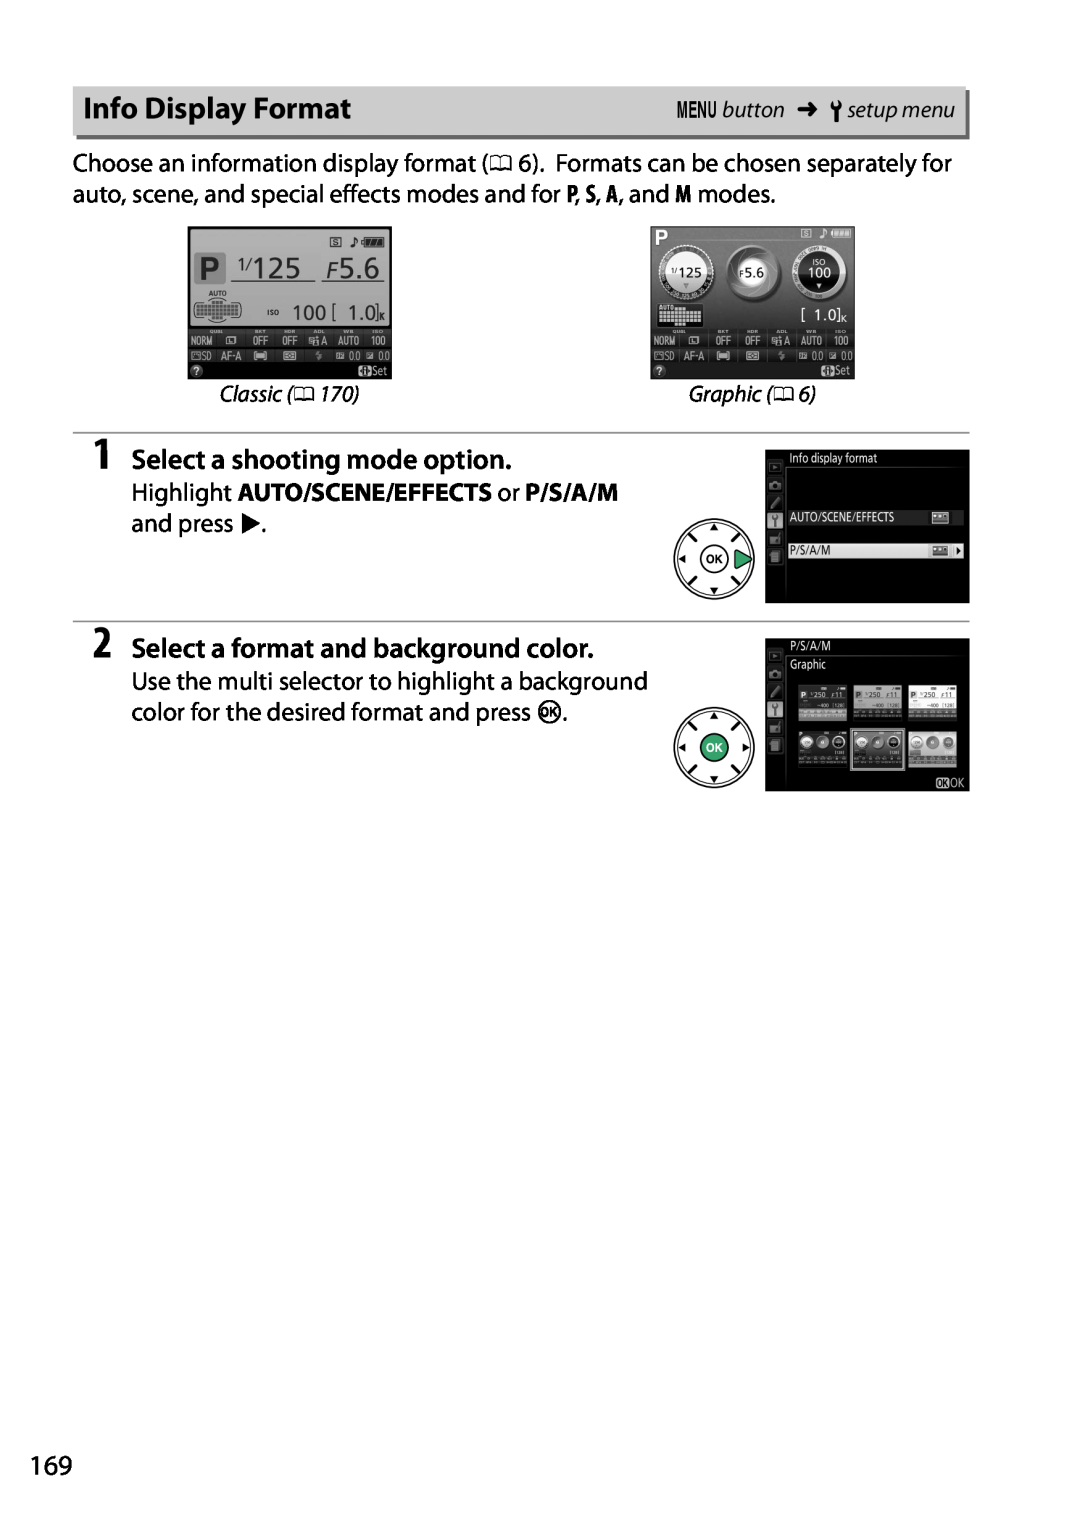 Nikon 1507 Info Display Format, Select a shooting mode option, Select a format and background color, Gbutton Bsetup menu 